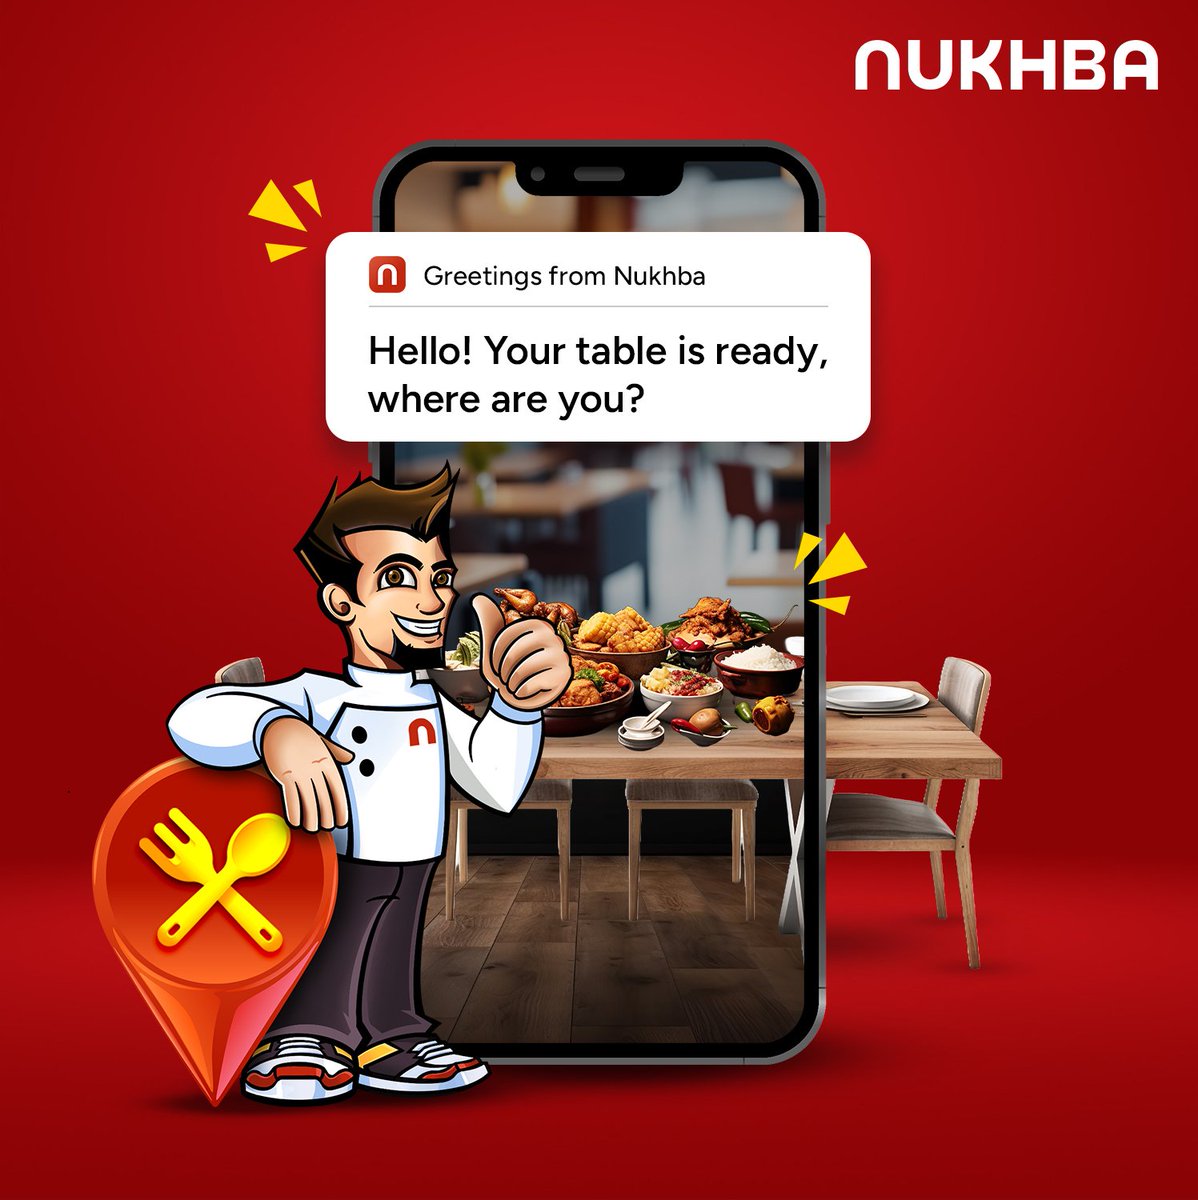 Hello Dubai! Dive into a World of Flavors, Your Table is Set. Join Us and Unlock happy Dining Moments Anytime! 

#nukhba #nukhbaApp #dubairestaurants #dubaieats #dubaifood #finediningdubai #restaurantsindubai #thingstodoindubai